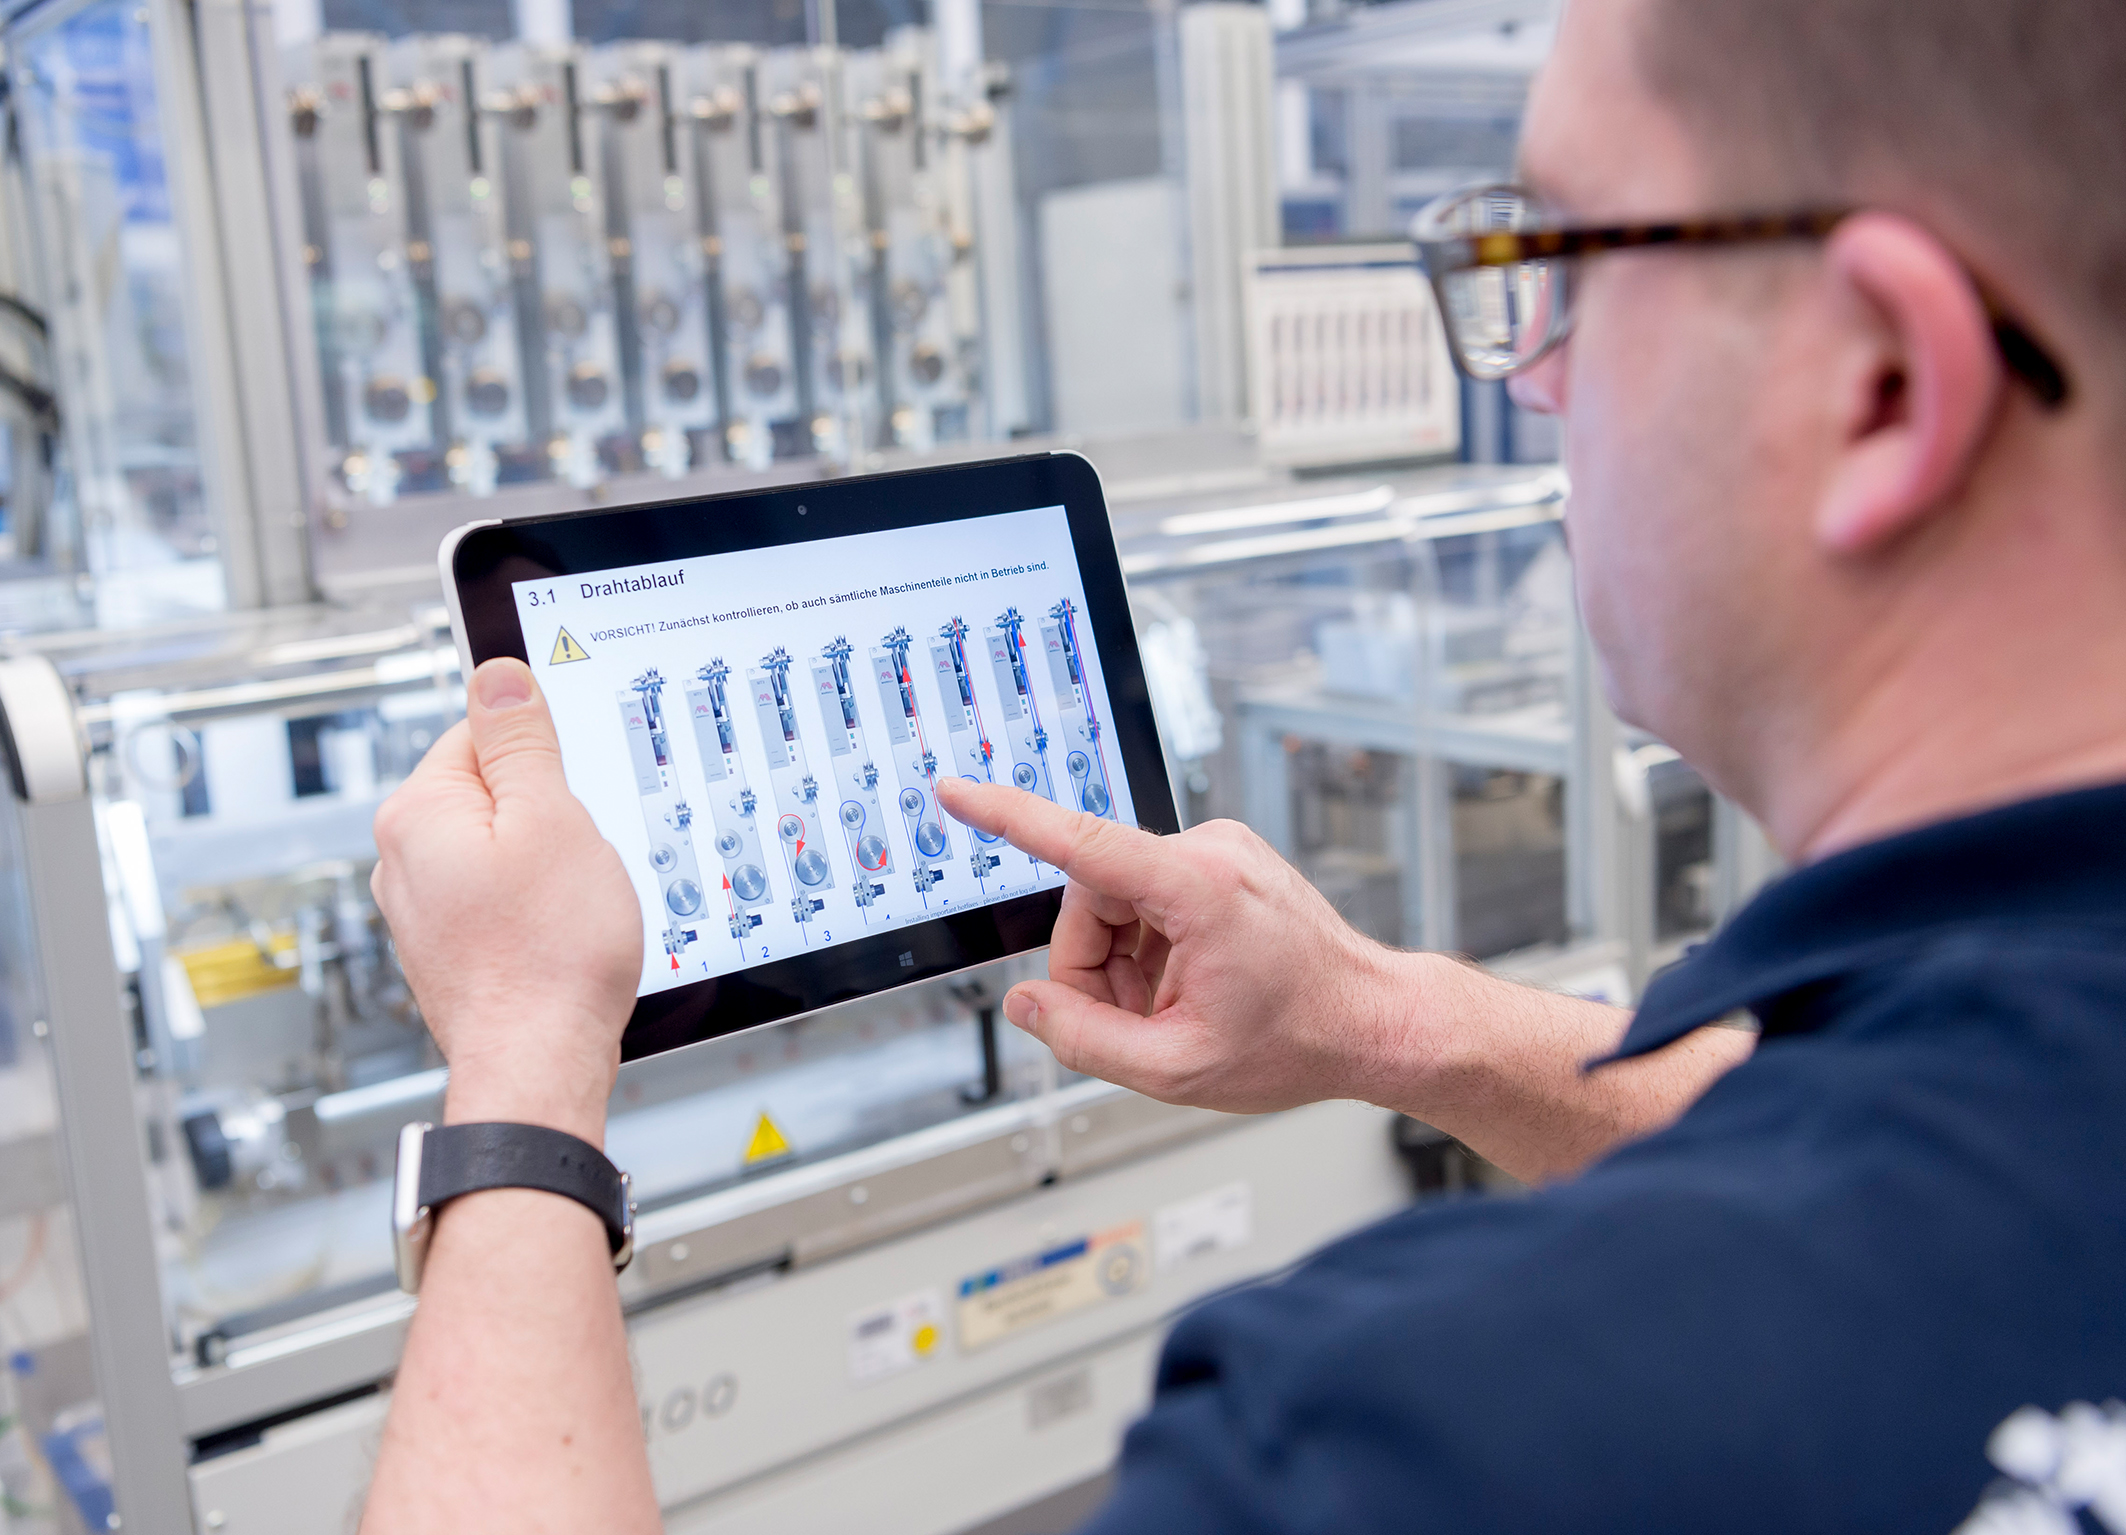 Industry 4.0 at Bosch – connected manufacturing